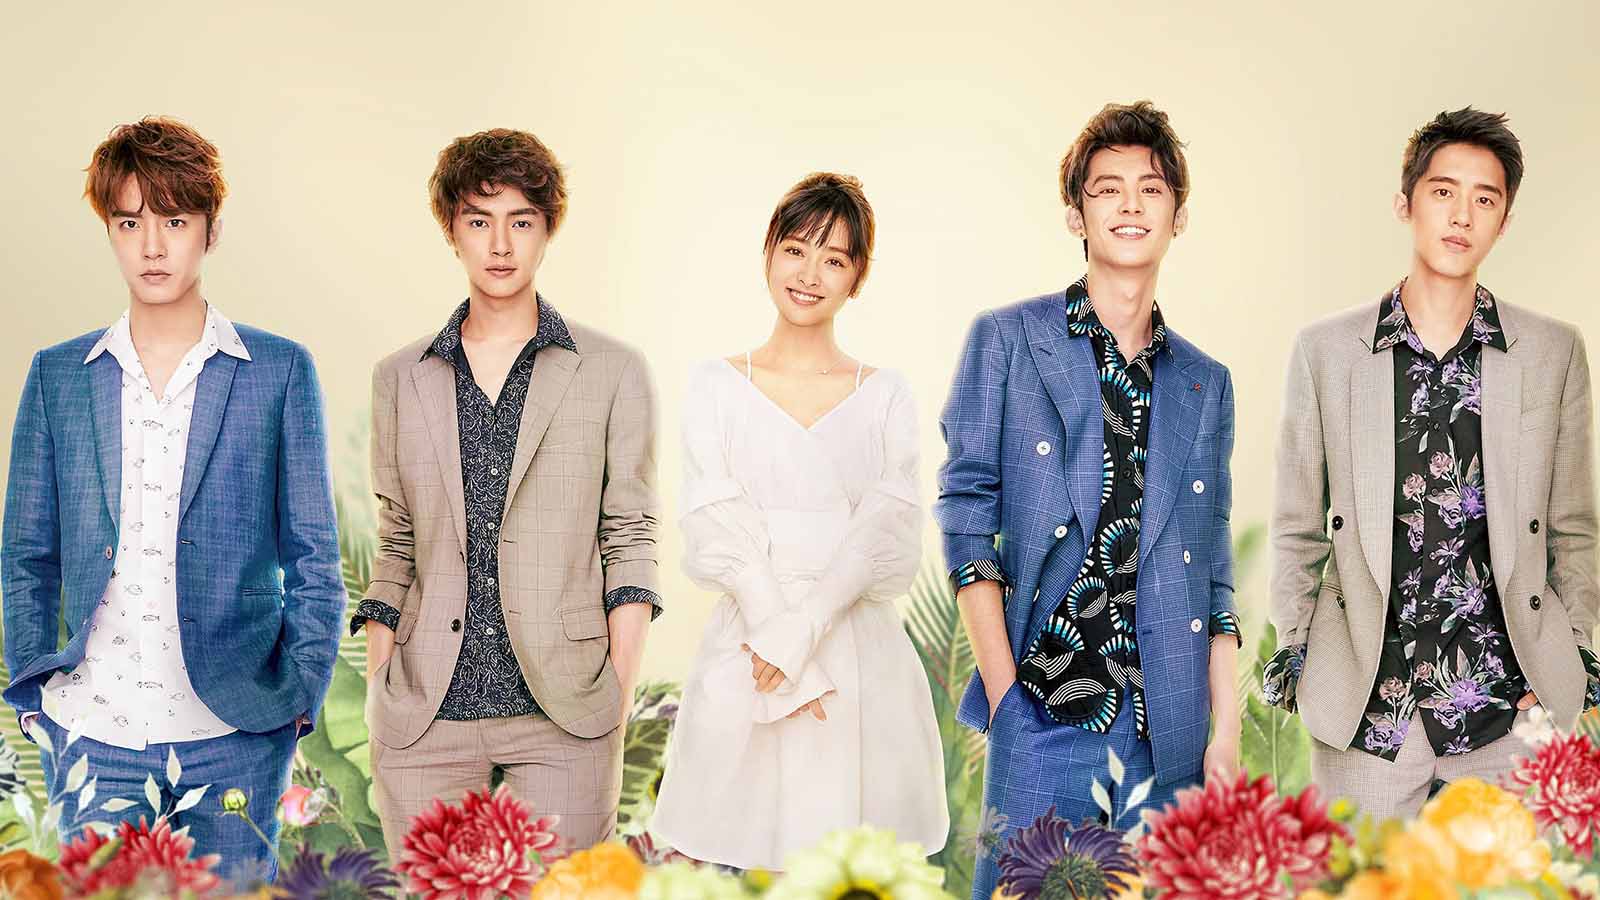 The manga 'Hana Yori Dango ' has had many adaptations over the years, including 'Boys Over Flowers'. But do you know the Chinese adaptation?